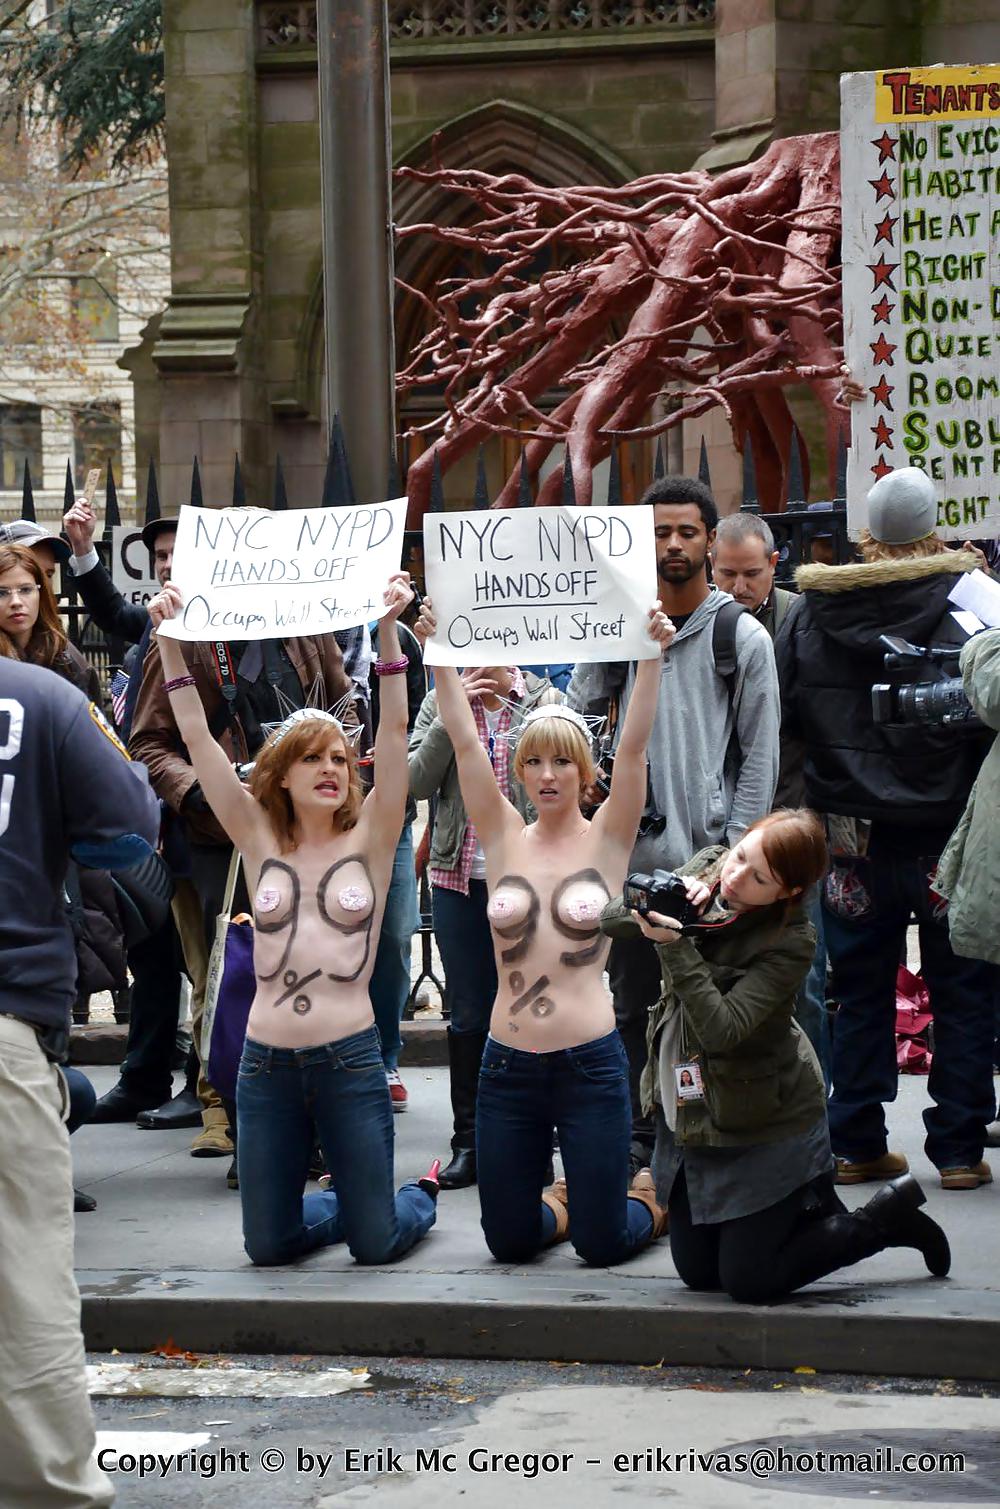 FEMEN - cool girls protest by public nudity - Part 2 #8770708